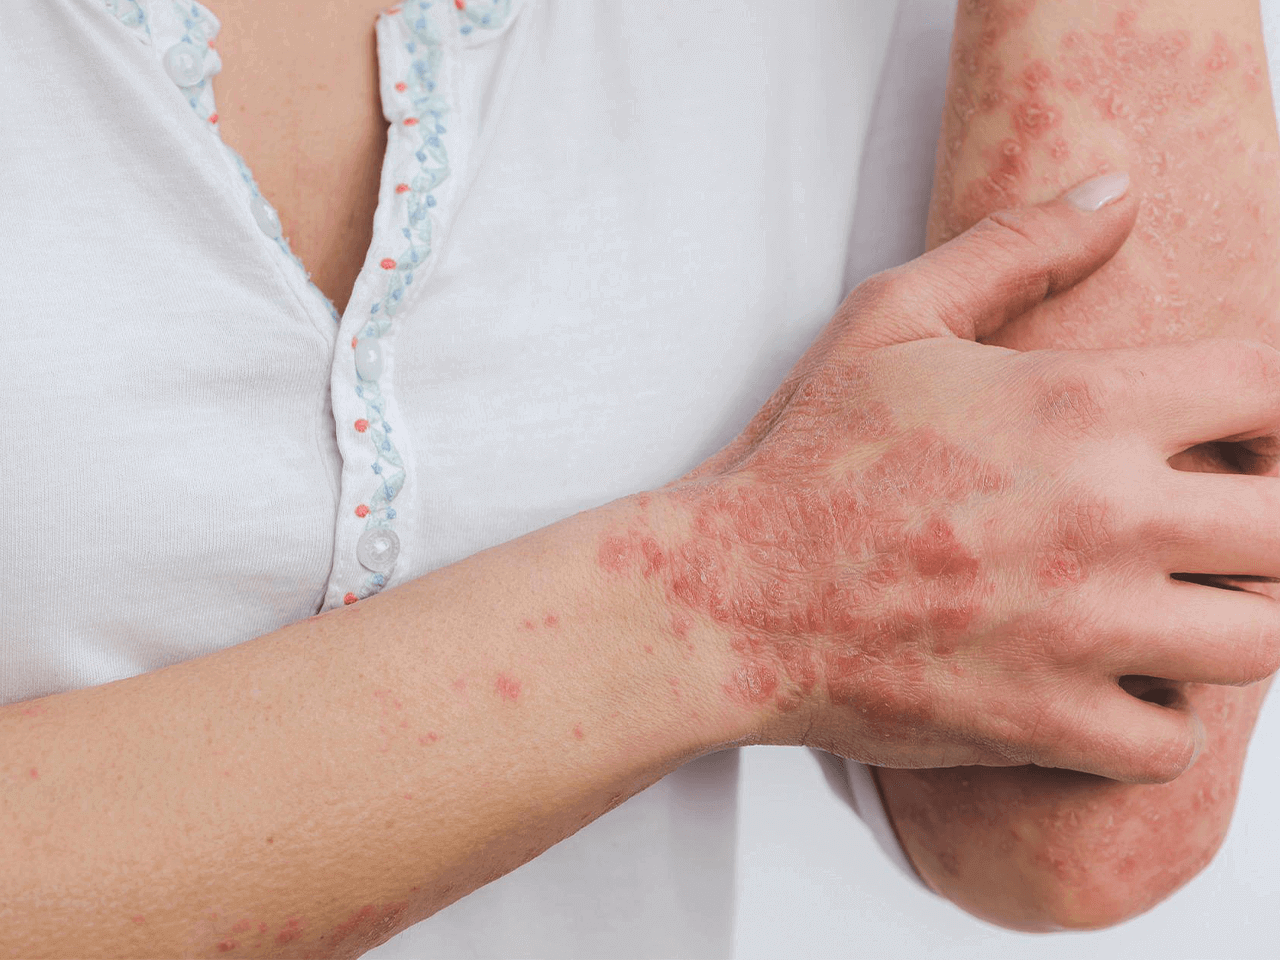 A Dermatologist Explains How To Treat Psoriasis